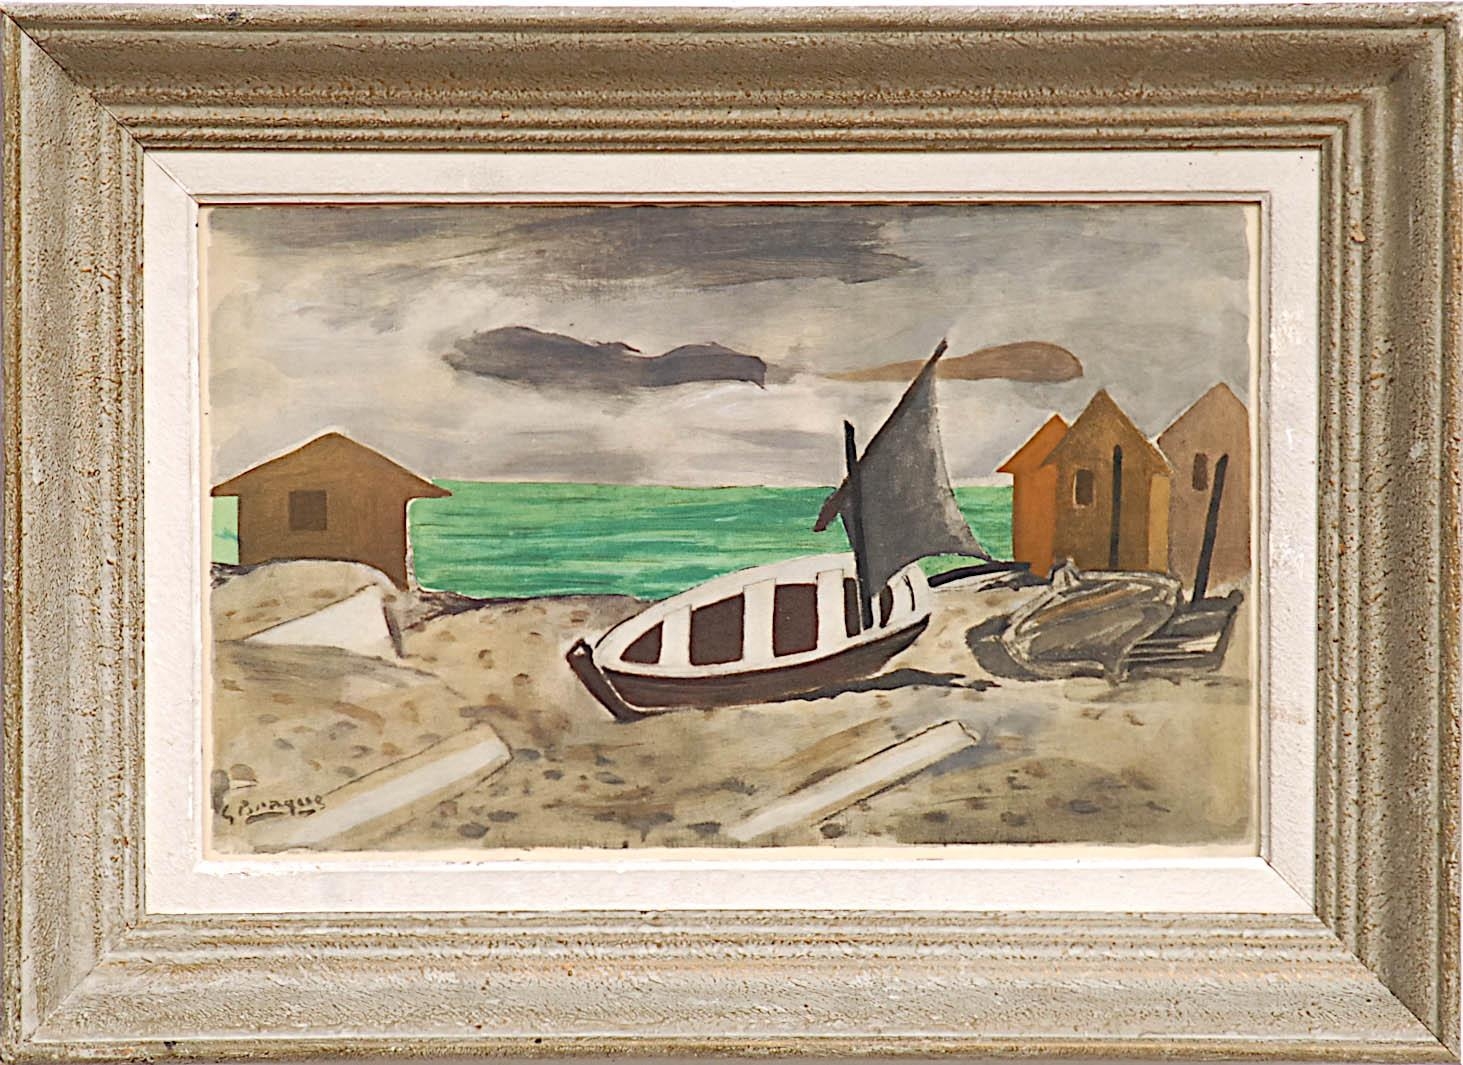 GEORGES BRAQUE, 'À Varengeville', pochoir, signed in the plate, edition of 1000, published in